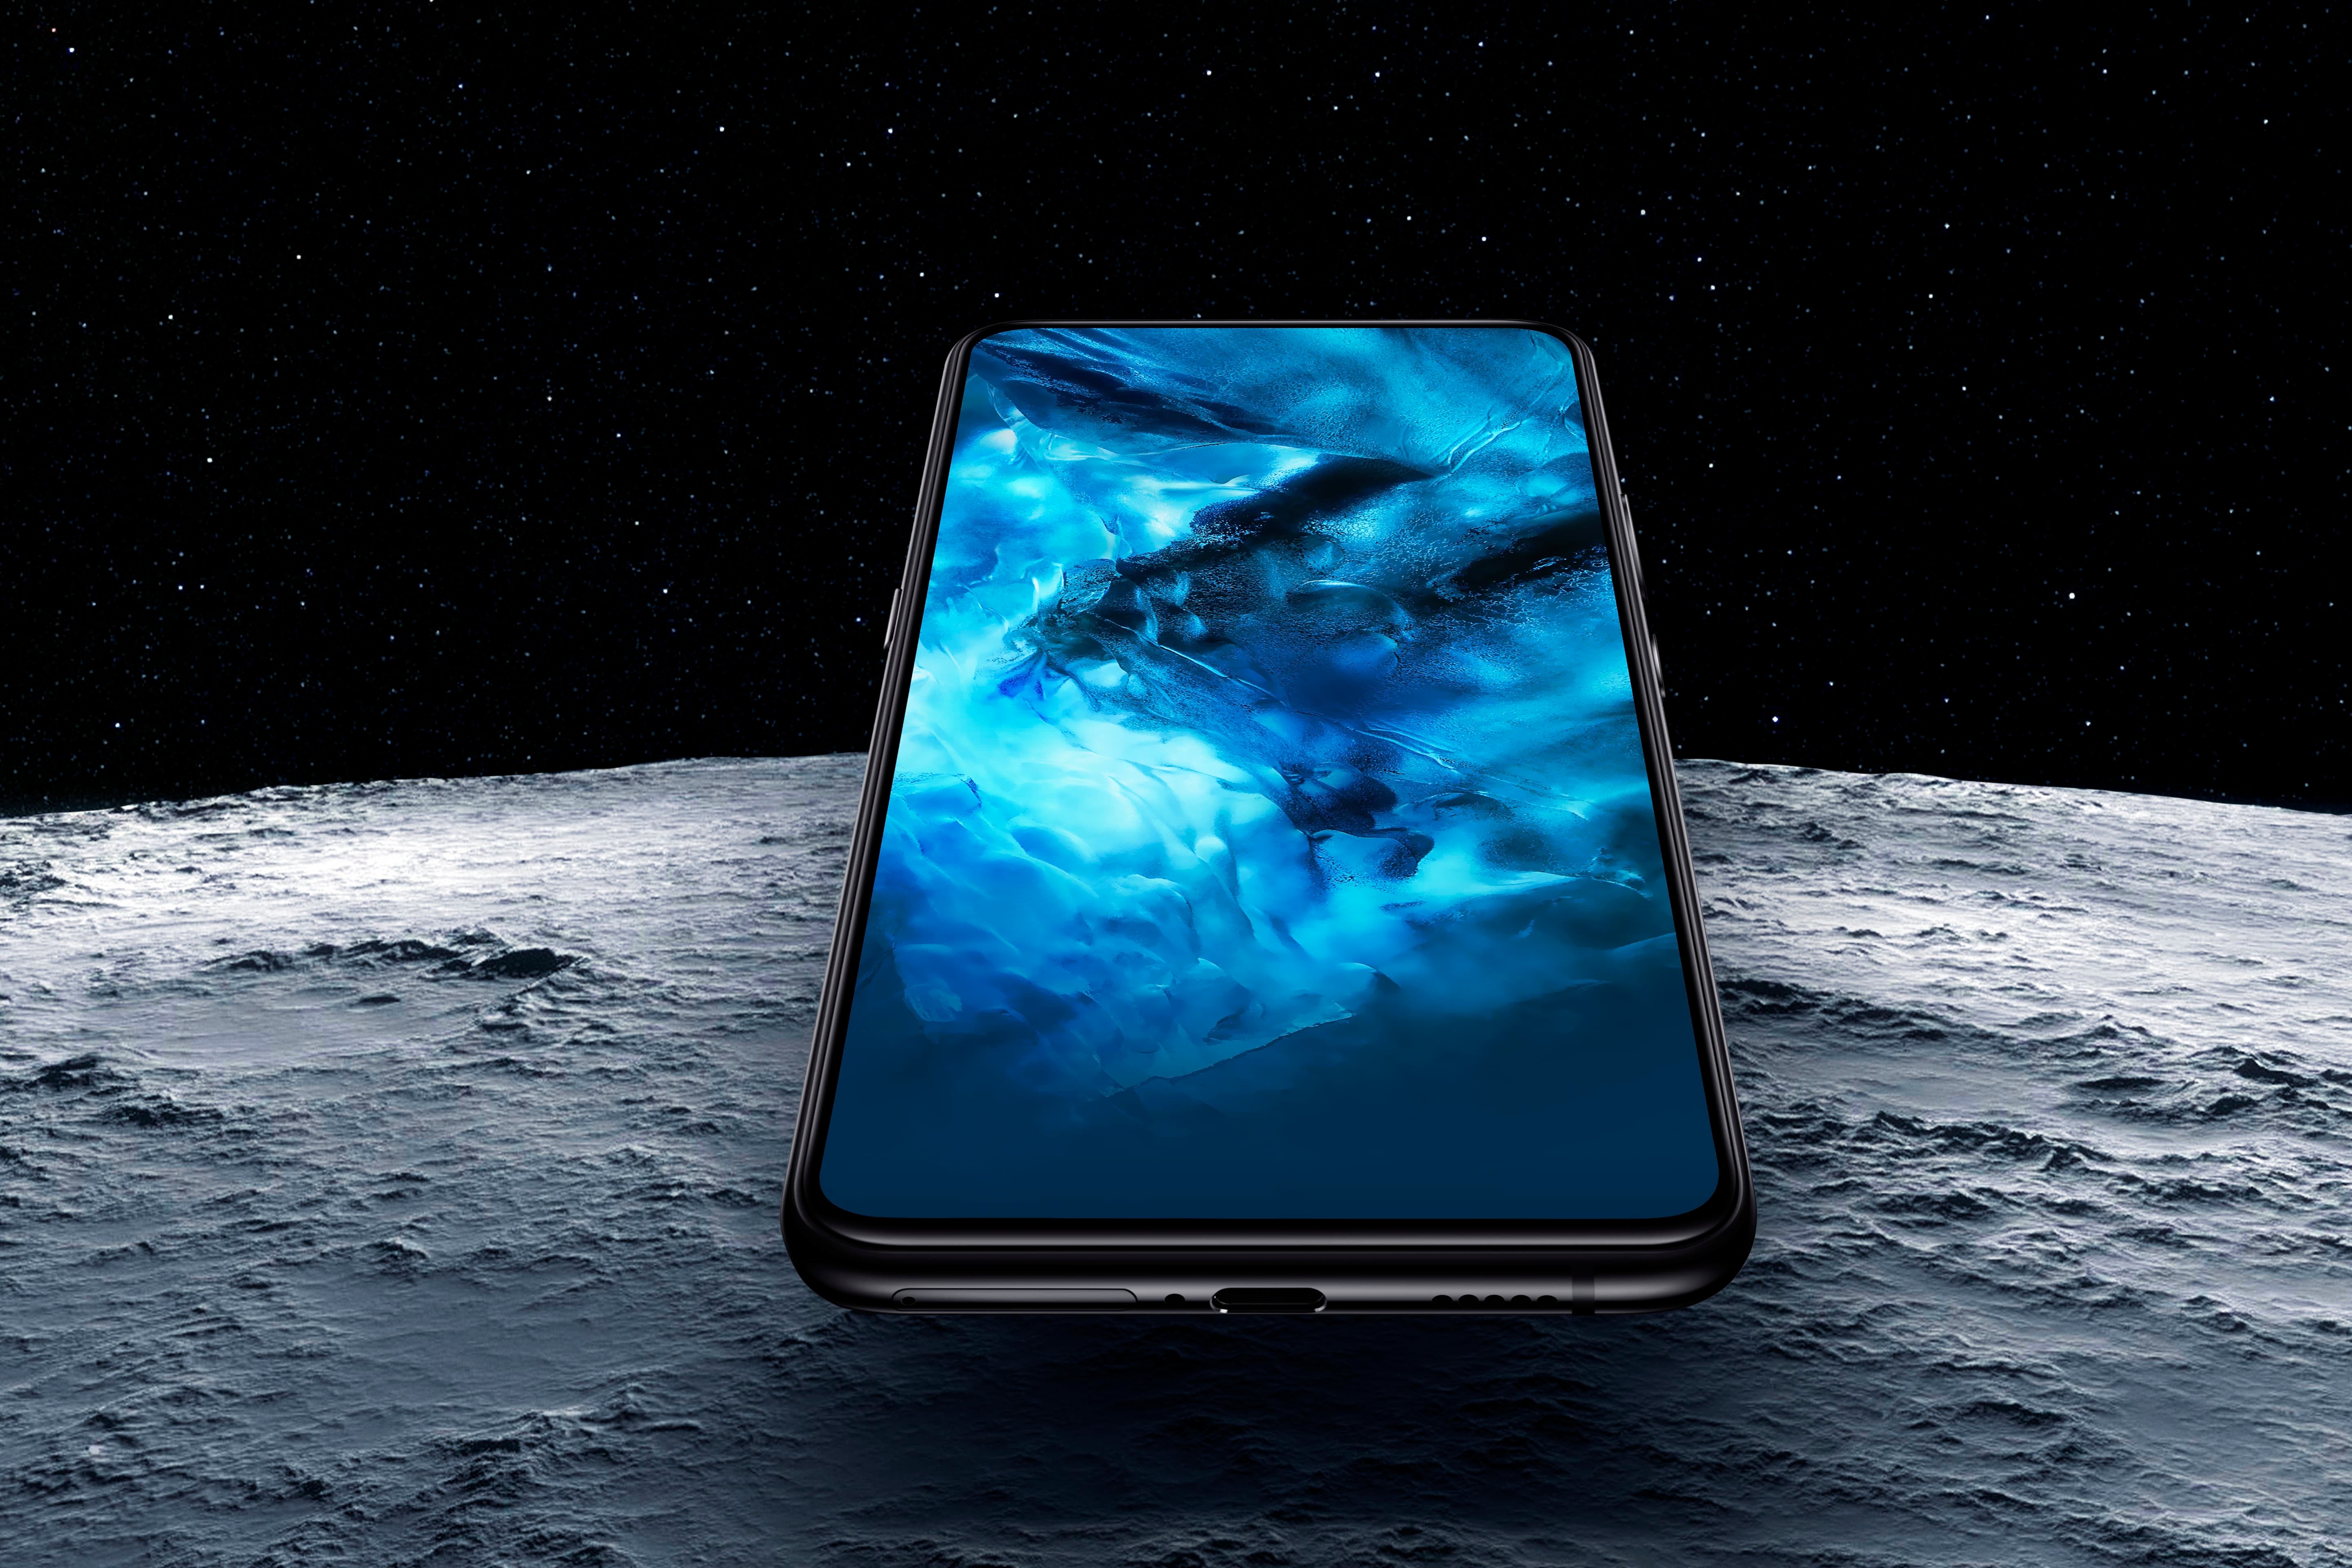 The most bezel-less phone in the world goes official: Manufacturers, take notes from the Vivo NEX